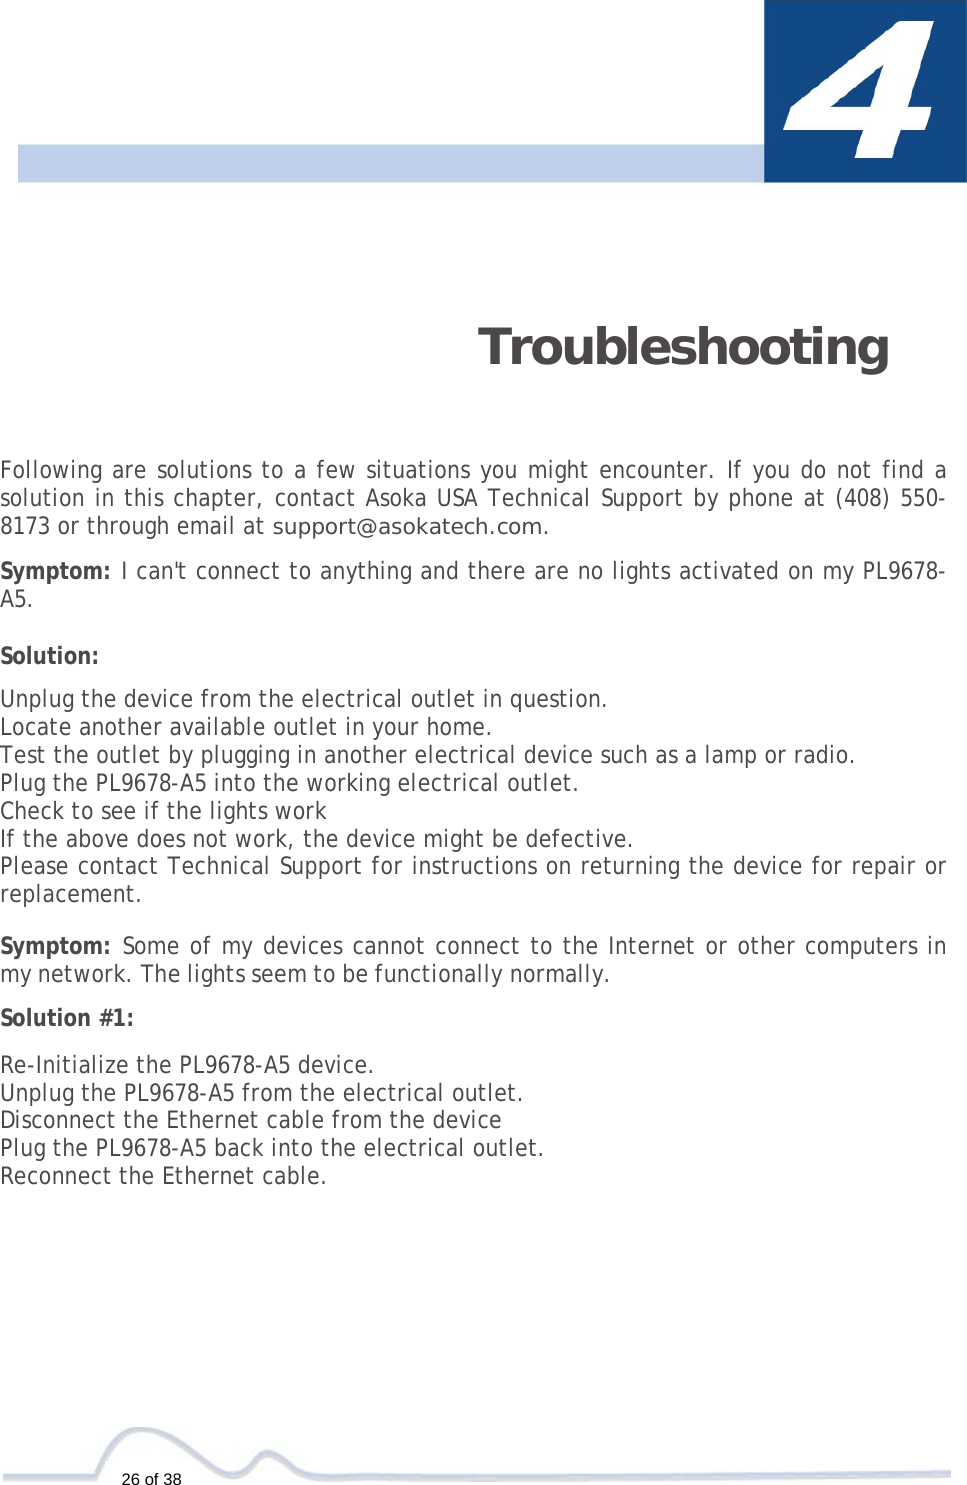  26 of 38    Troubleshooting   Following are solutions to a few situations you might encounter. If you do not find a solution in this chapter, contact Asoka USA Technical Support by phone at (408) 550-8173 or through email at support@asokatech.com.  Symptom: I can&apos;t connect to anything and there are no lights activated on my PL9678-A5.  Solution:  Unplug the device from the electrical outlet in question. Locate another available outlet in your home. Test the outlet by plugging in another electrical device such as a lamp or radio. Plug the PL9678-A5 into the working electrical outlet. Check to see if the lights work If the above does not work, the device might be defective. Please contact Technical Support for instructions on returning the device for repair or replacement.  Symptom: Some of my devices cannot connect to the Internet or other computers in my network. The lights seem to be functionally normally.  Solution #1:  Re-Initialize the PL9678-A5 device. Unplug the PL9678-A5 from the electrical outlet. Disconnect the Ethernet cable from the device Plug the PL9678-A5 back into the electrical outlet. Reconnect the Ethernet cable. 